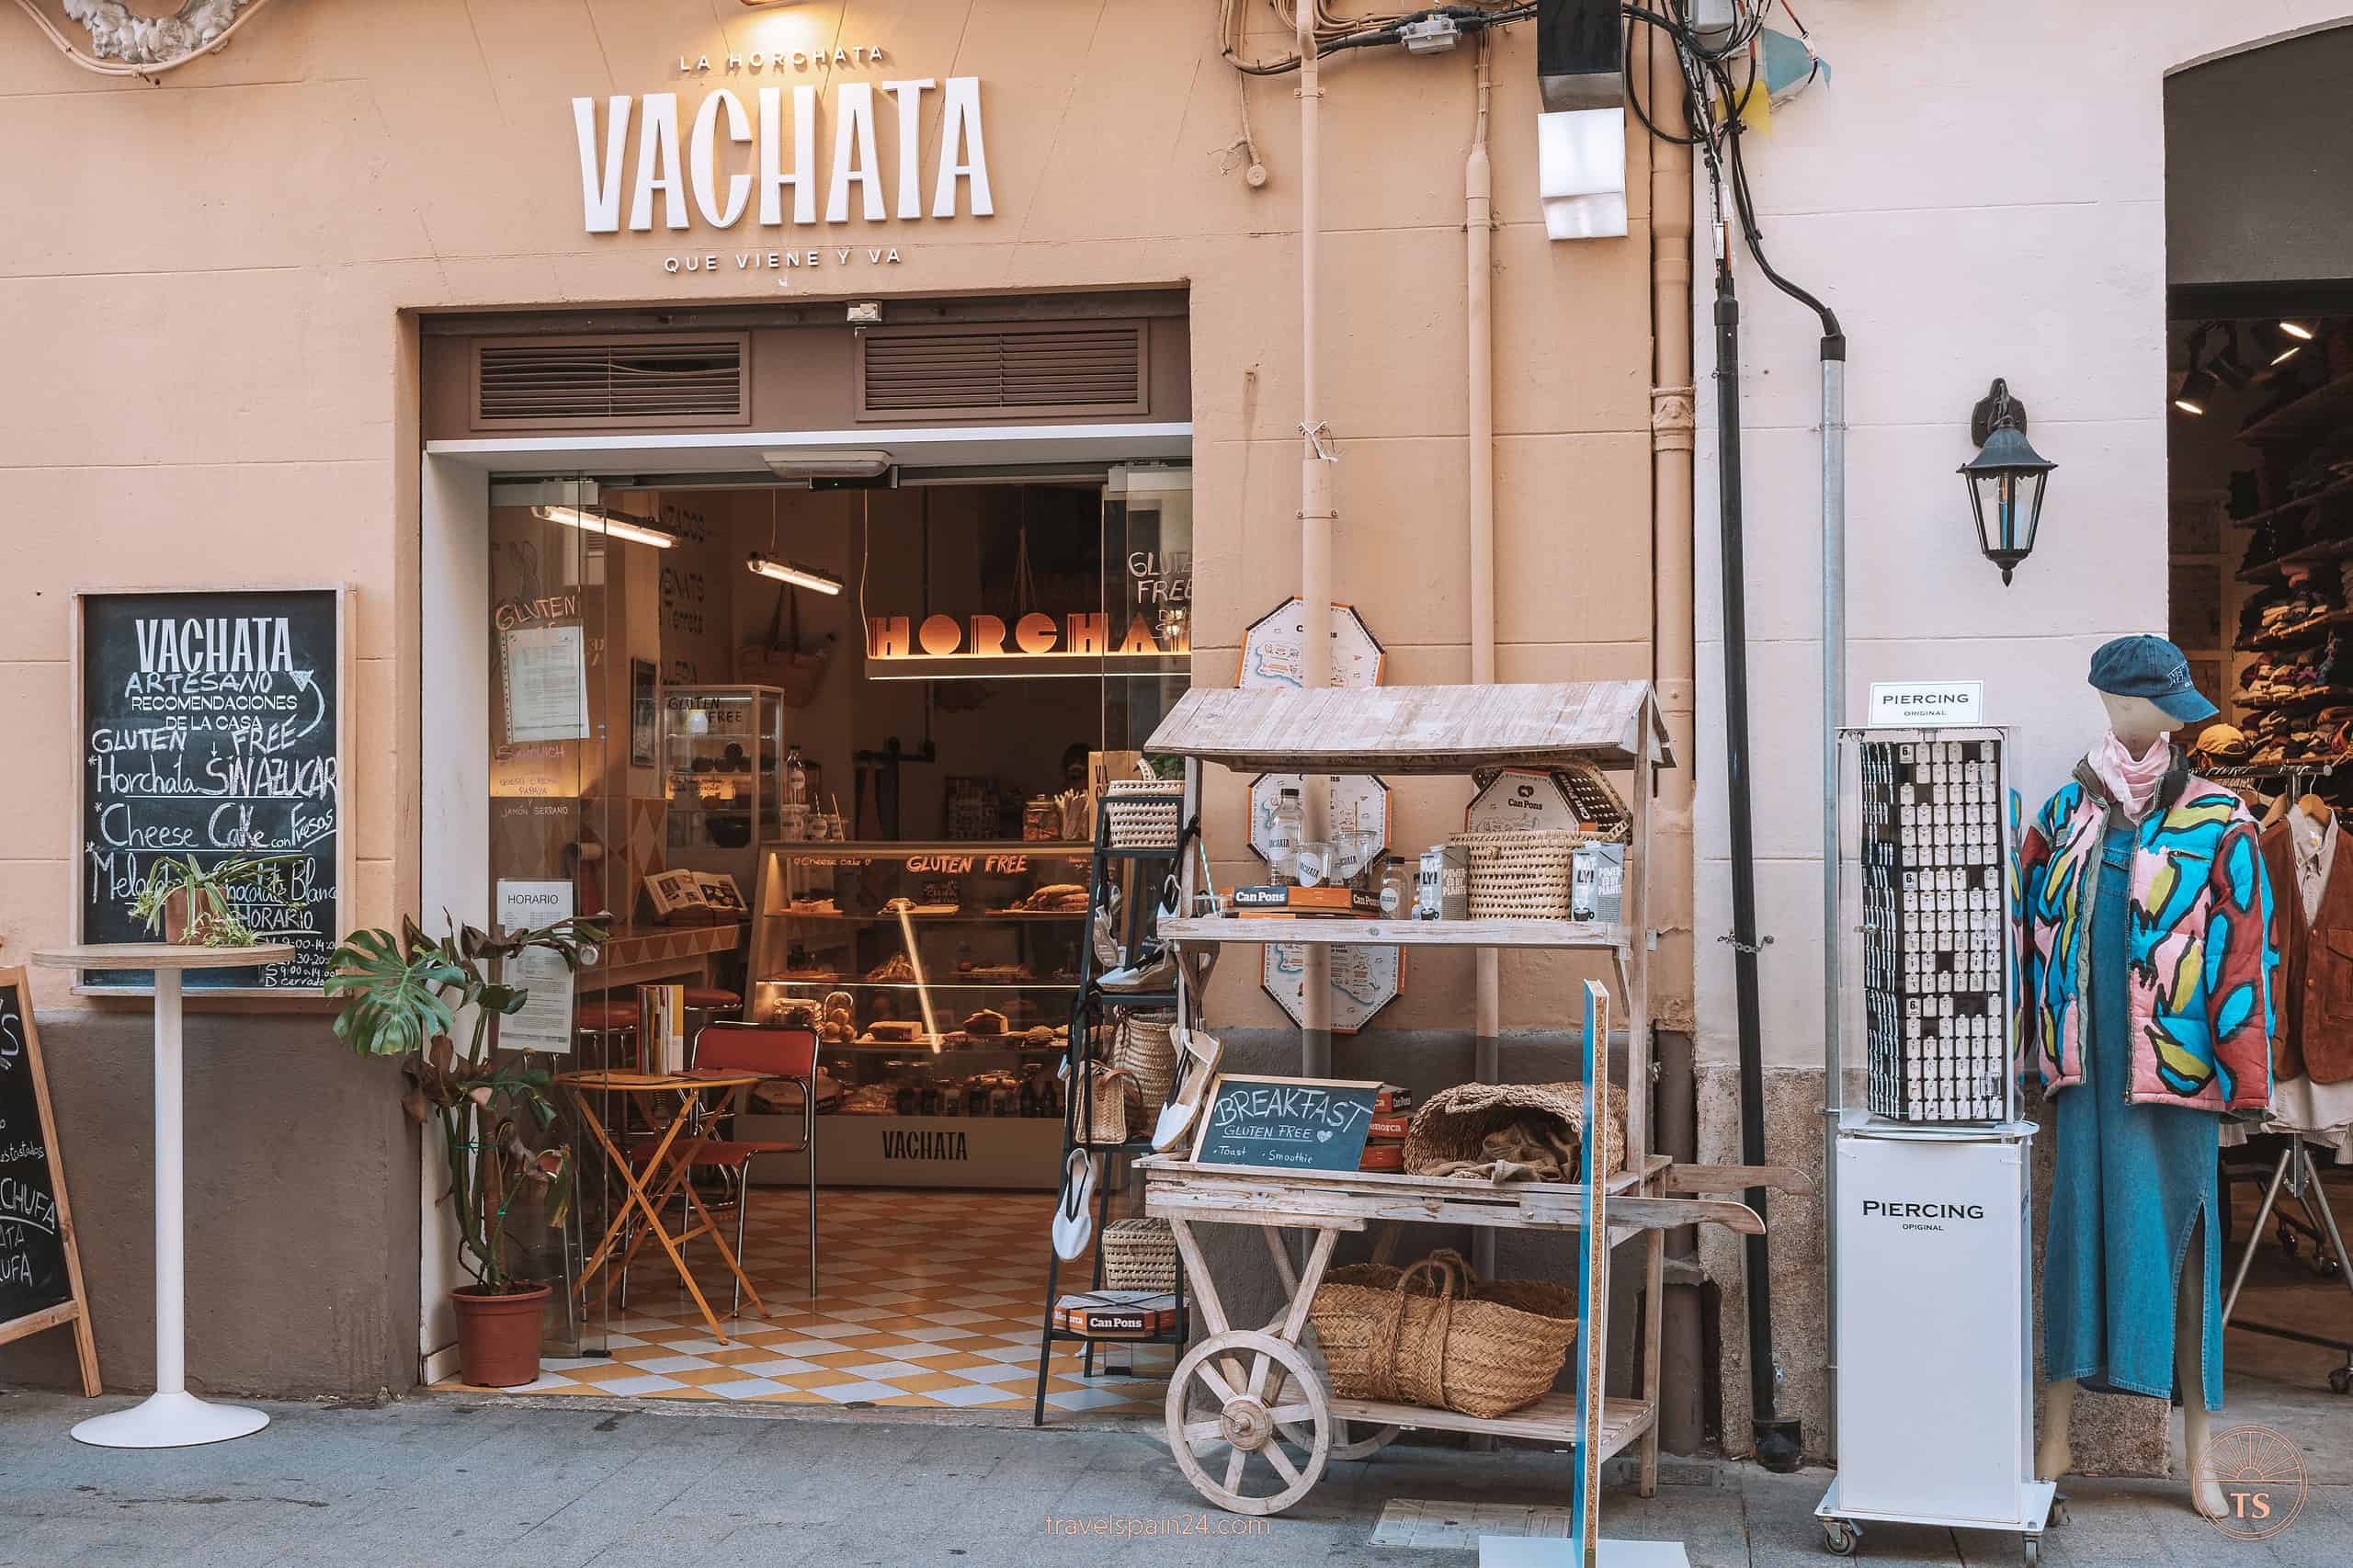 Front view of Vachata, a quaint small pastry shop in Valencia where visitors can buy sandwiches and cakes, inviting passersby to taste local treats.